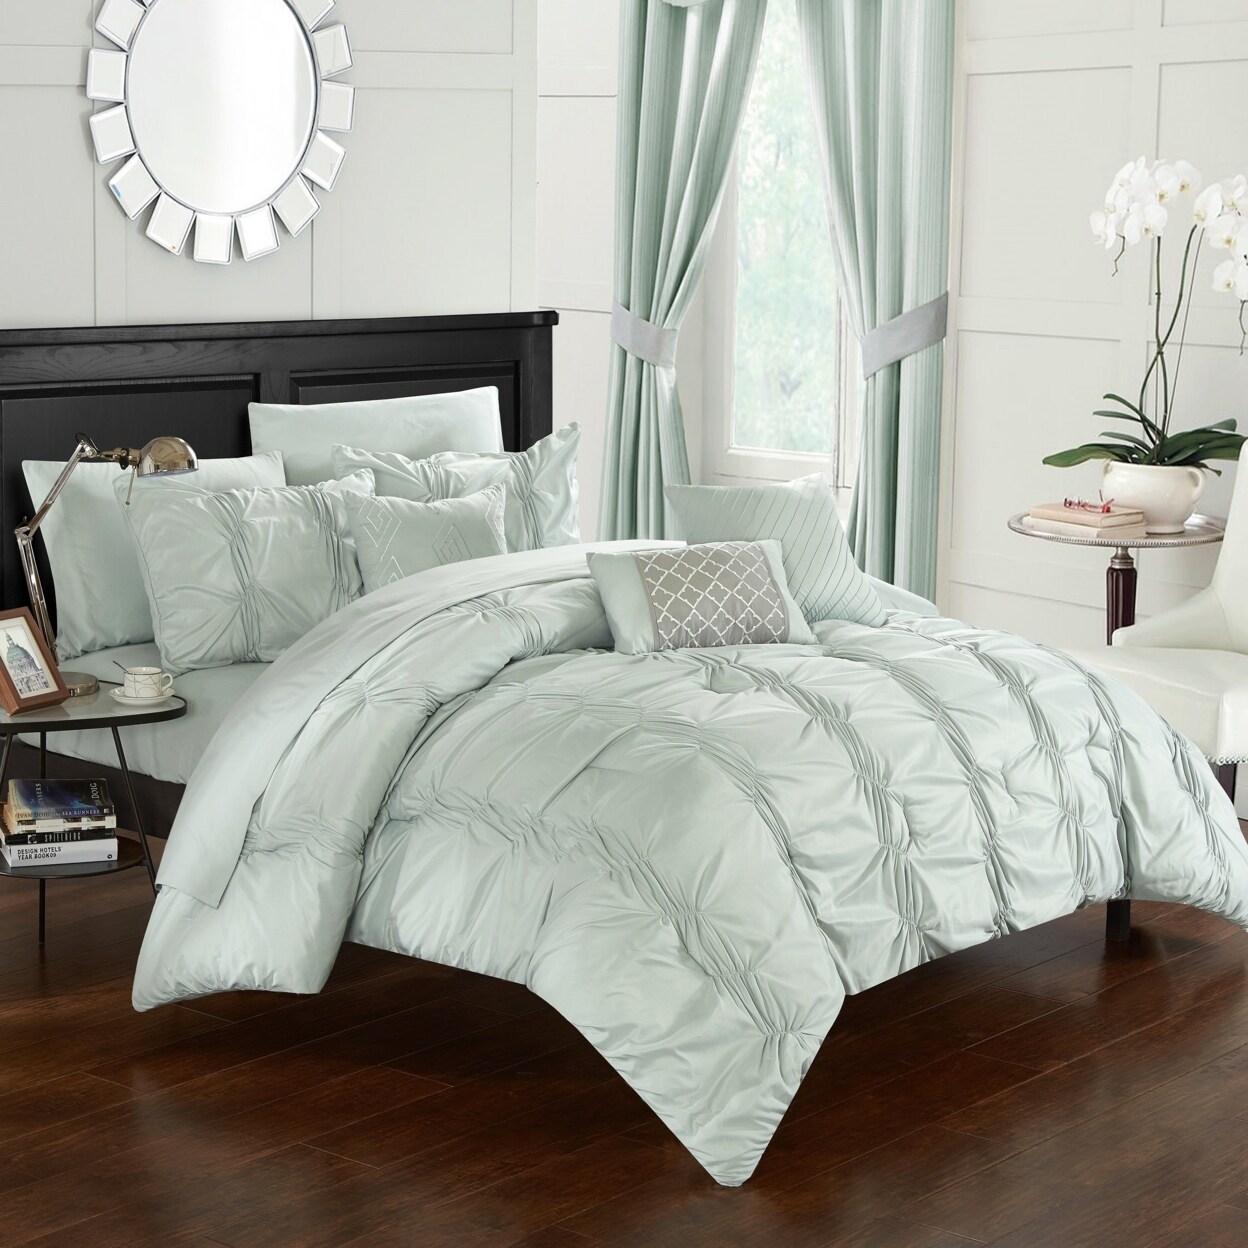 Chic Home 10 Piece Voni Pinch Pleated ruffled and pleated complete Bed In a Bag Comforter Set Sheets set and Decorative pillows